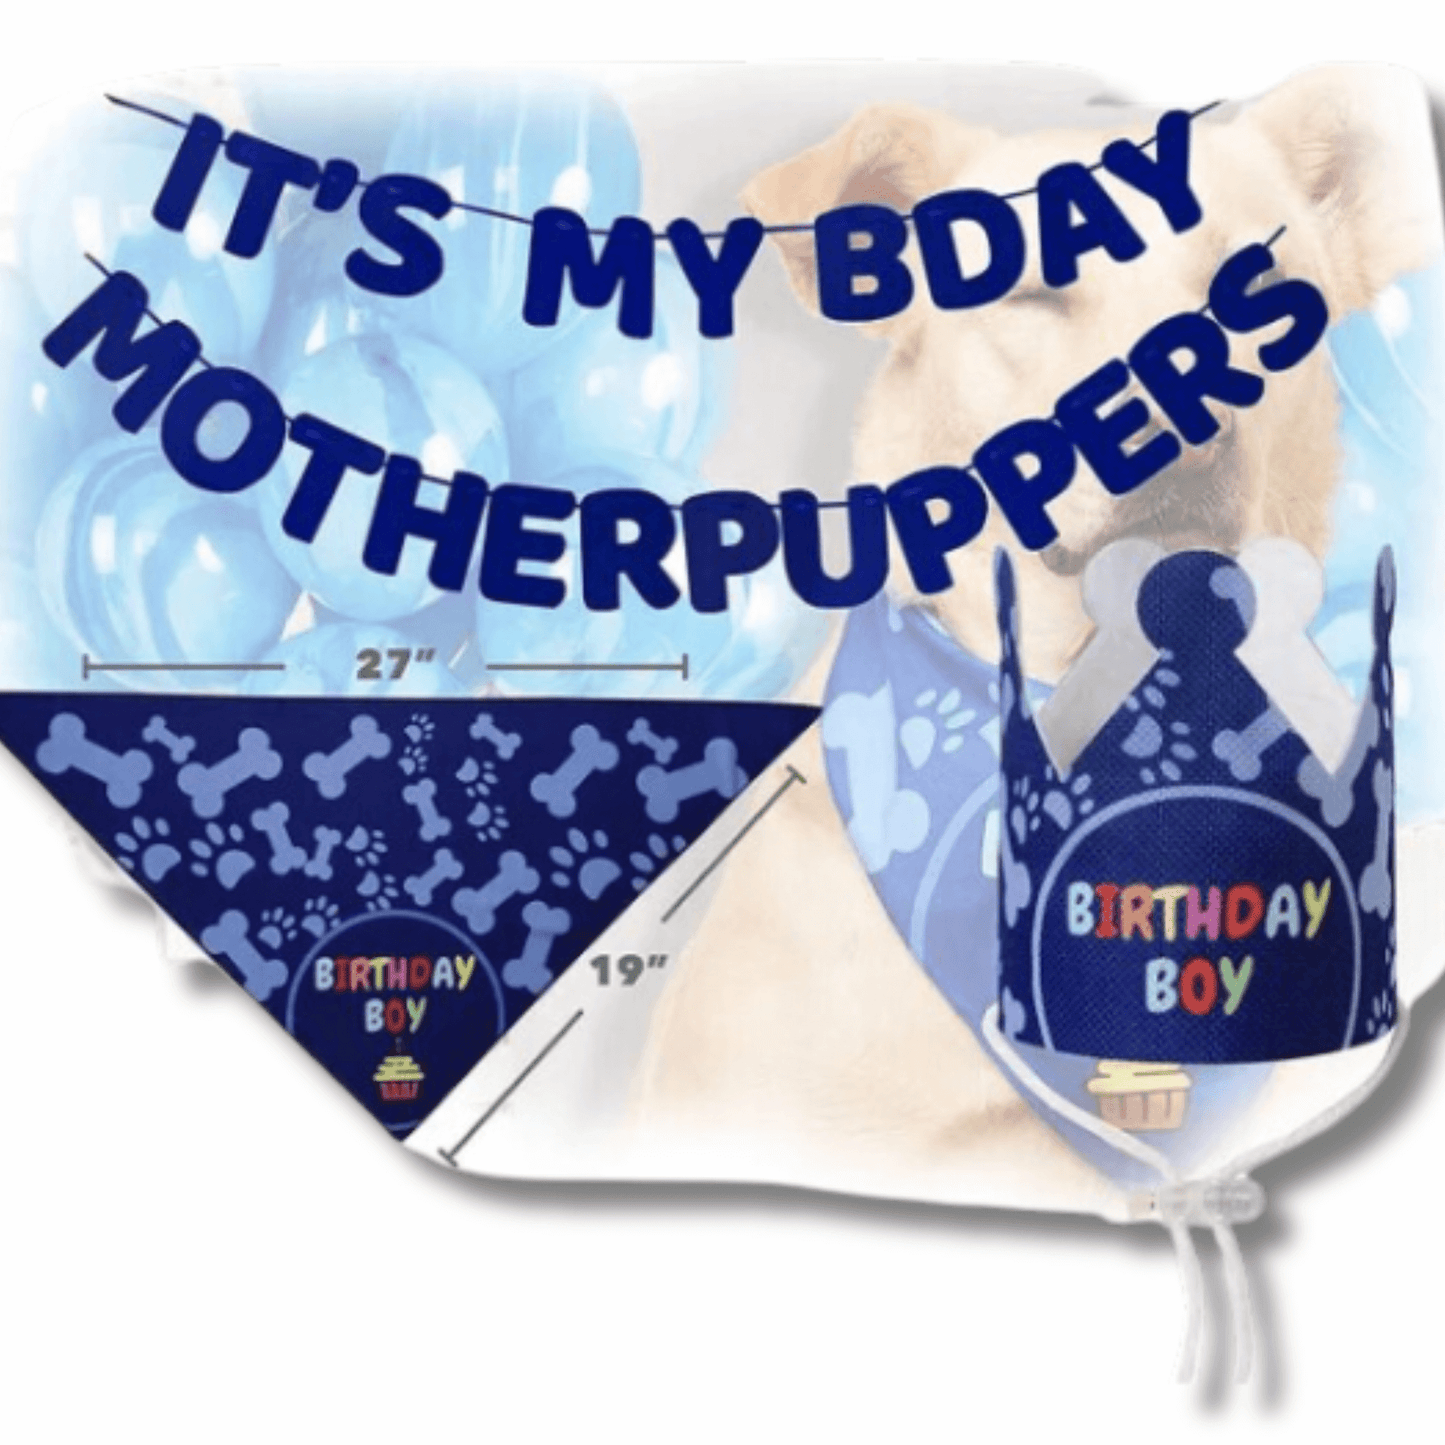 it's my birthday motherpuppers dog party banner set